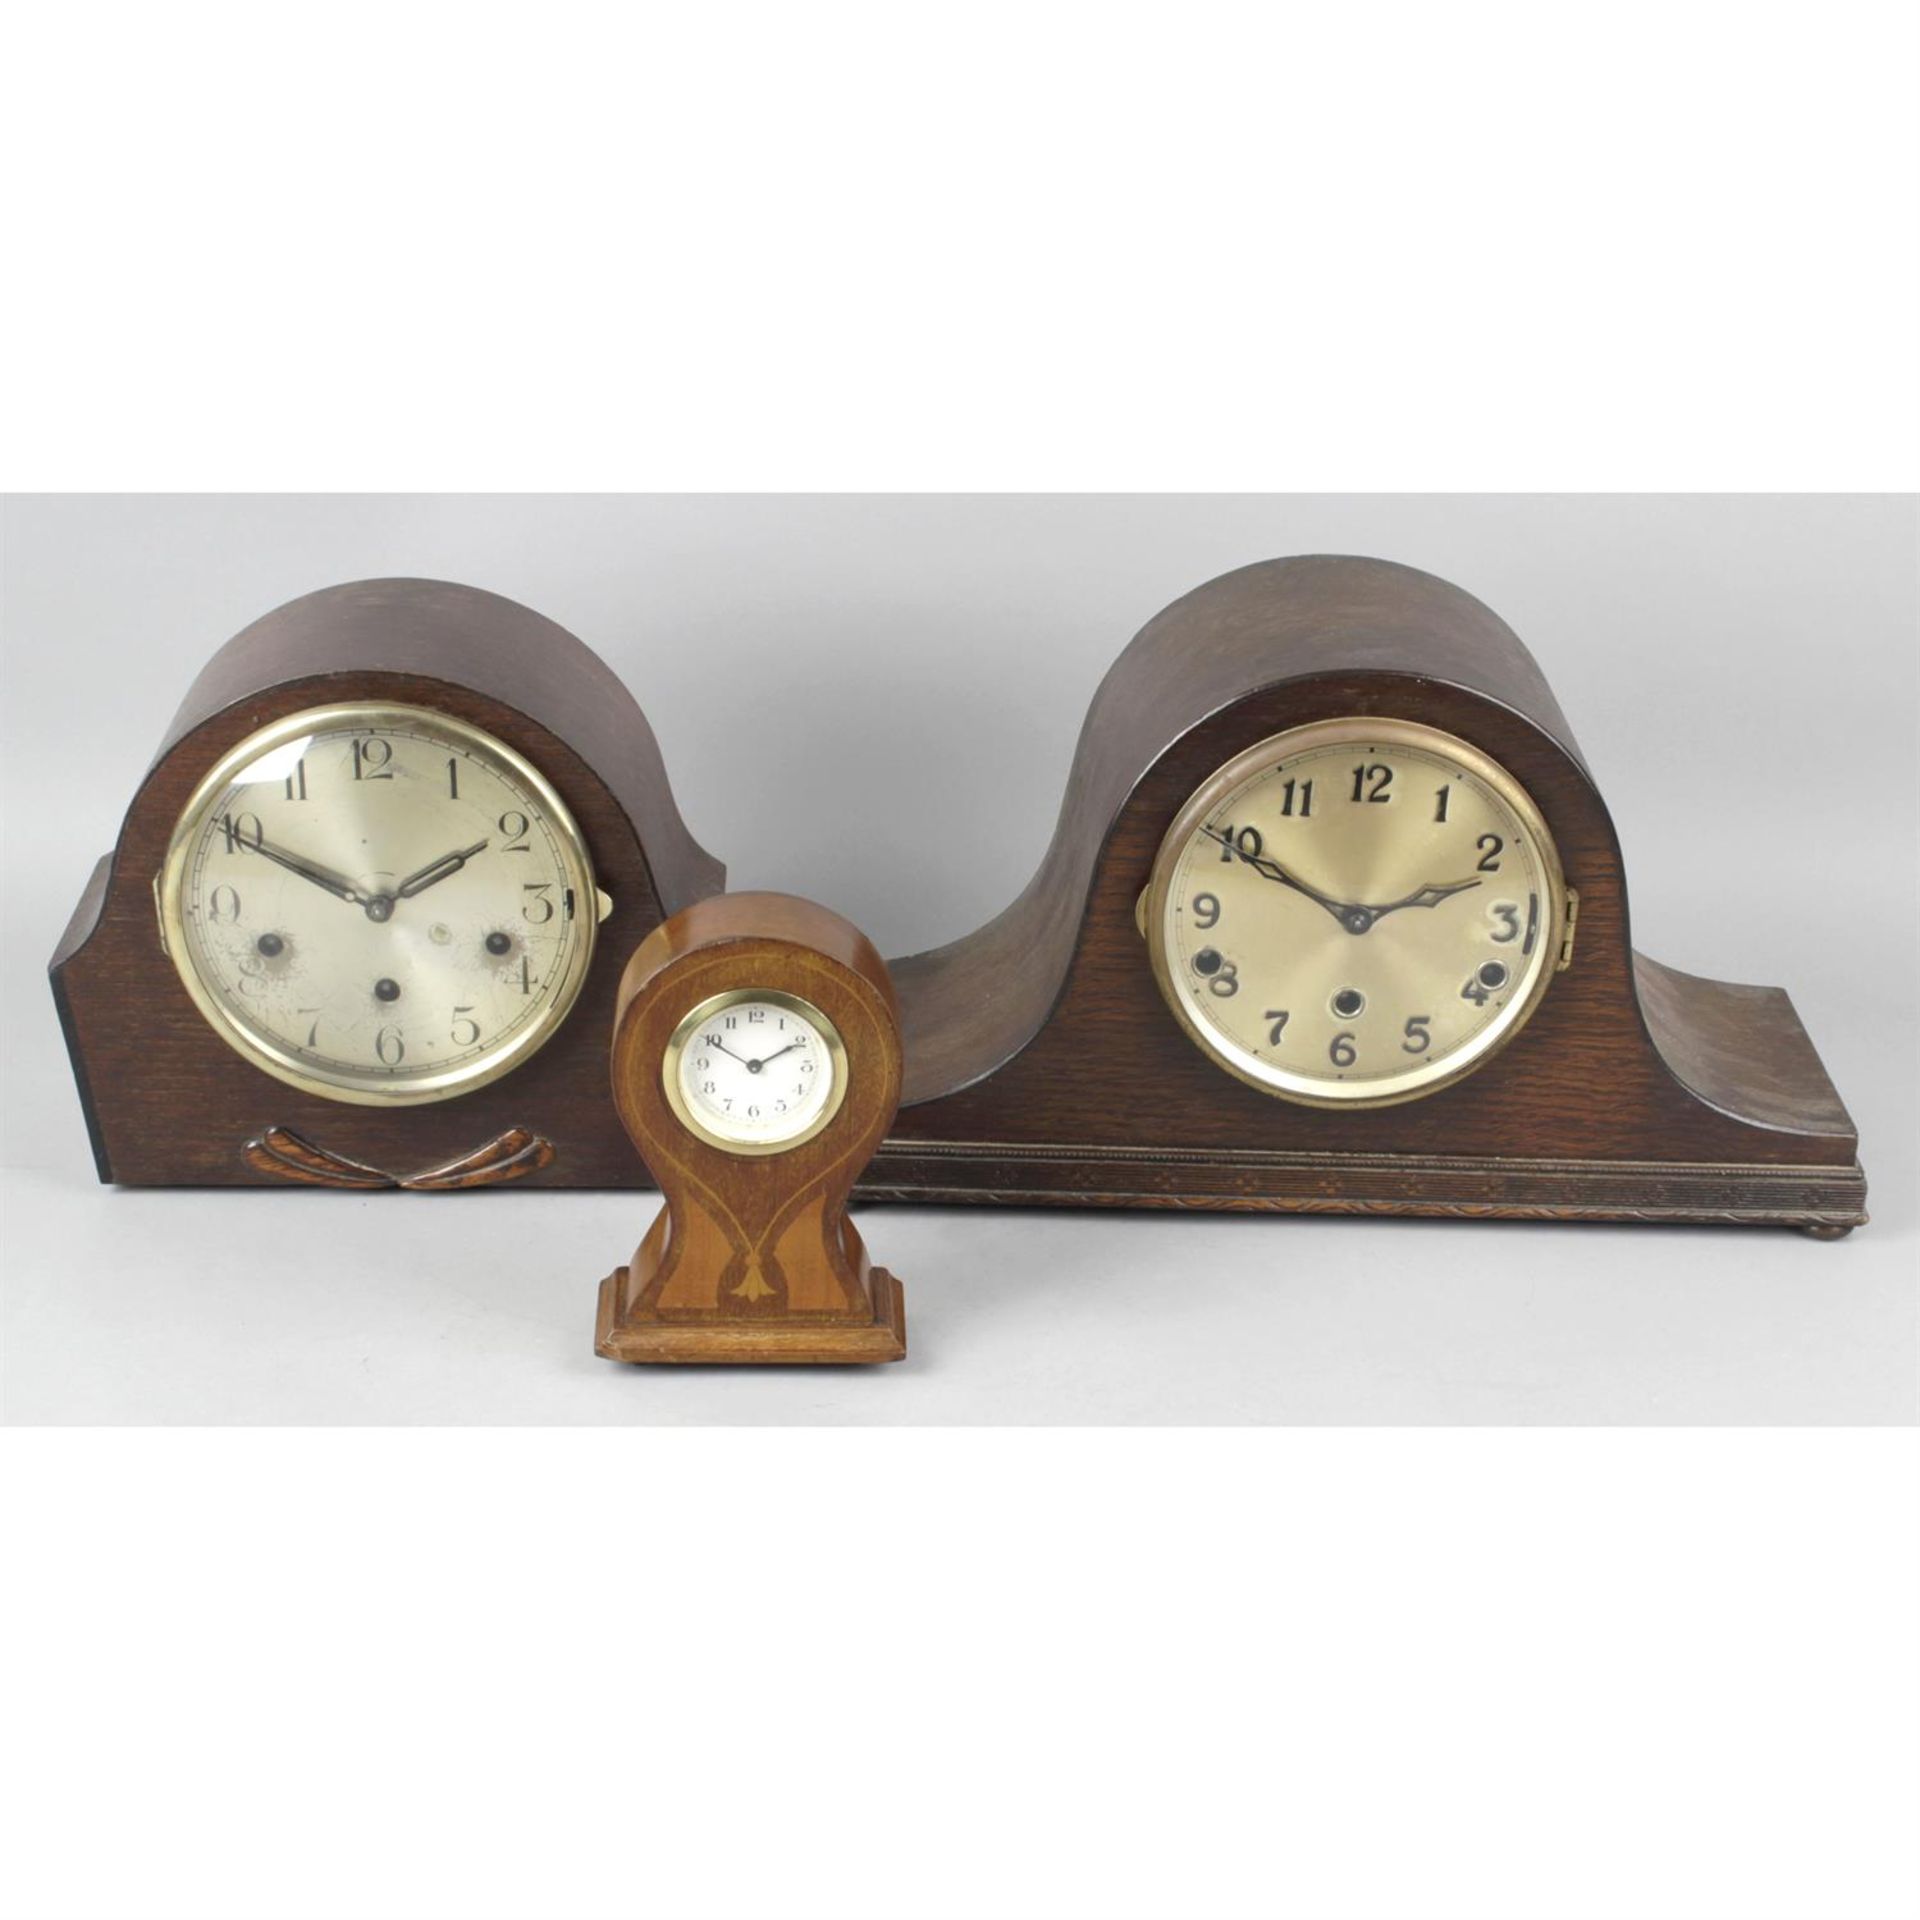 A quantity of Edwardian and early 20th century clocks.